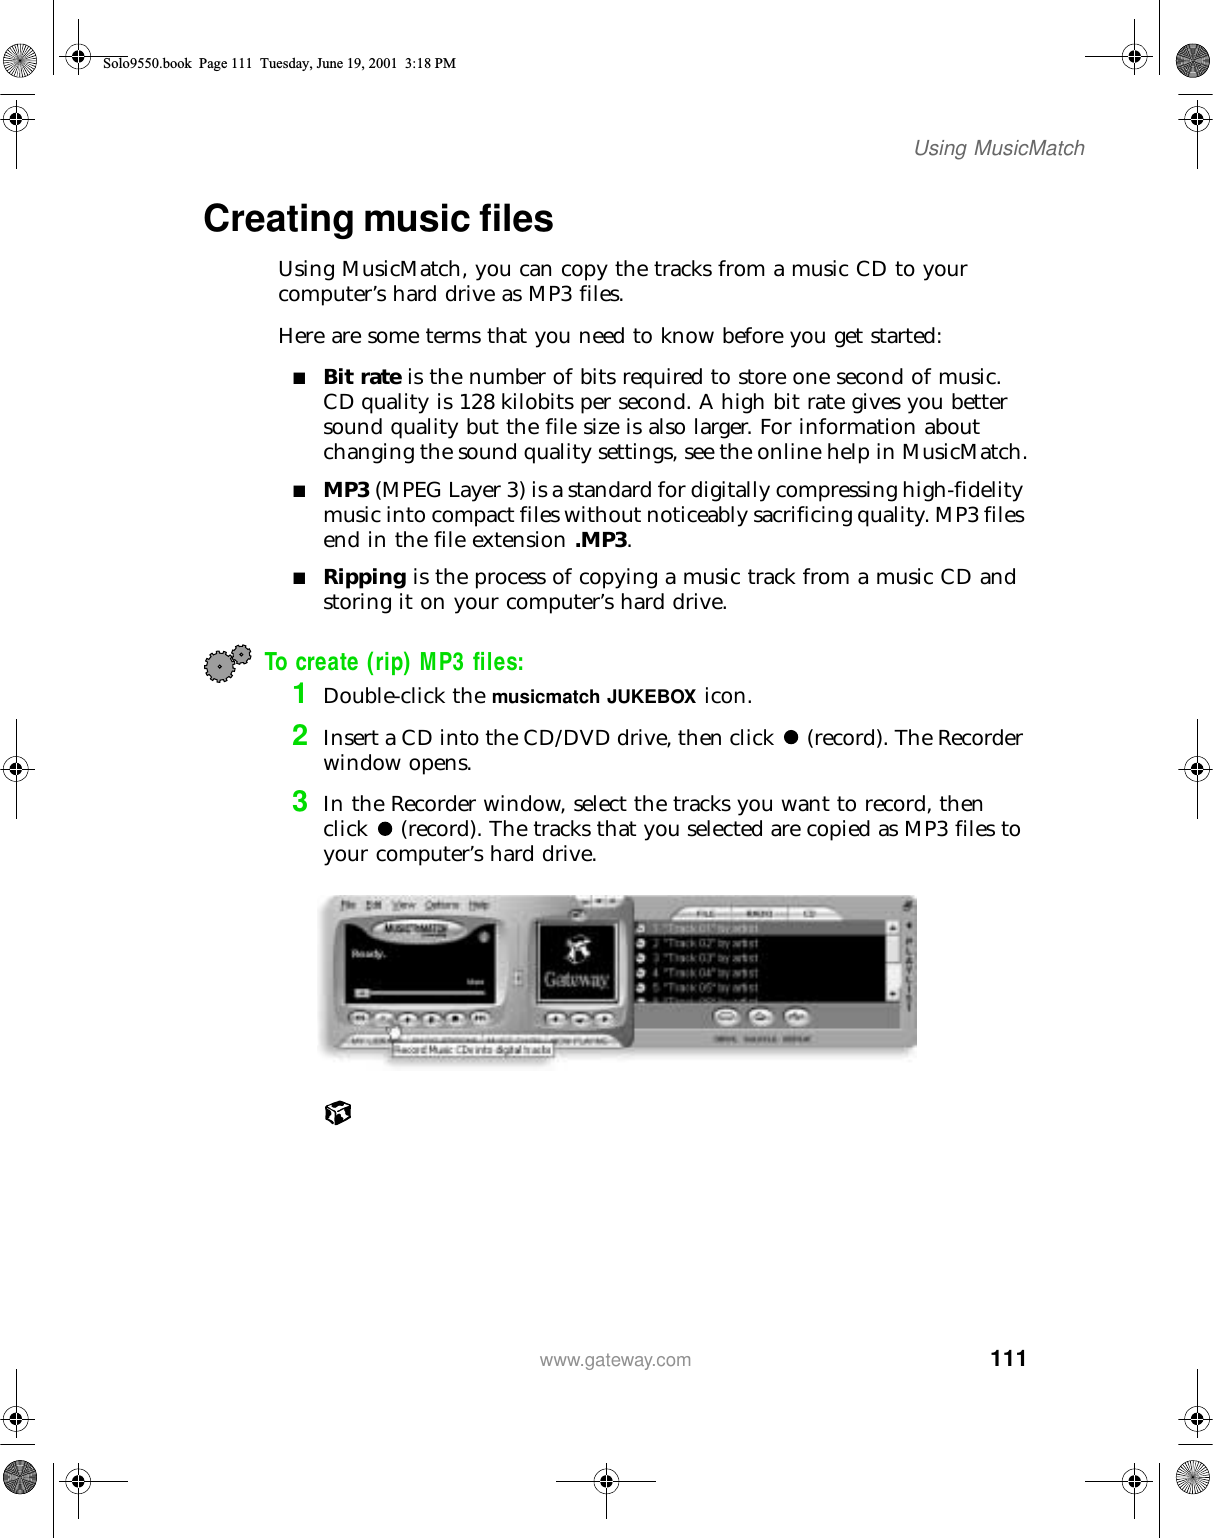 111Using MusicMatchwww.gateway.comCreating music filesUsing MusicMatch, you can copy the tracks from a music CD to your computer’s hard drive as MP3 files.Here are some terms that you need to know before you get started:■Bit rate is the number of bits required to store one second of music. CD quality is 128 kilobits per second. A high bit rate gives you better sound quality but the file size is also larger. For information about changing the sound quality settings, see the online help in MusicMatch.■MP3 (MPEG Layer 3) is a standard for digitally compressing high-fidelity music into compact files without noticeably sacrificing quality. MP3 files end in the file extension .MP3.■Ripping is the process of copying a music track from a music CD and storing it on your computer’s hard drive.To create (rip) MP3 files:1Double-click the musicmatch JUKEBOX icon.2Insert a CD into the CD/DVD drive, then click (record). The Recorder window opens.3In the Recorder window, select the tracks you want to record, then click (record). The tracks that you selected are copied as MP3 files to your computer’s hard drive.Solo9550.book Page 111 Tuesday, June 19, 2001 3:18 PM